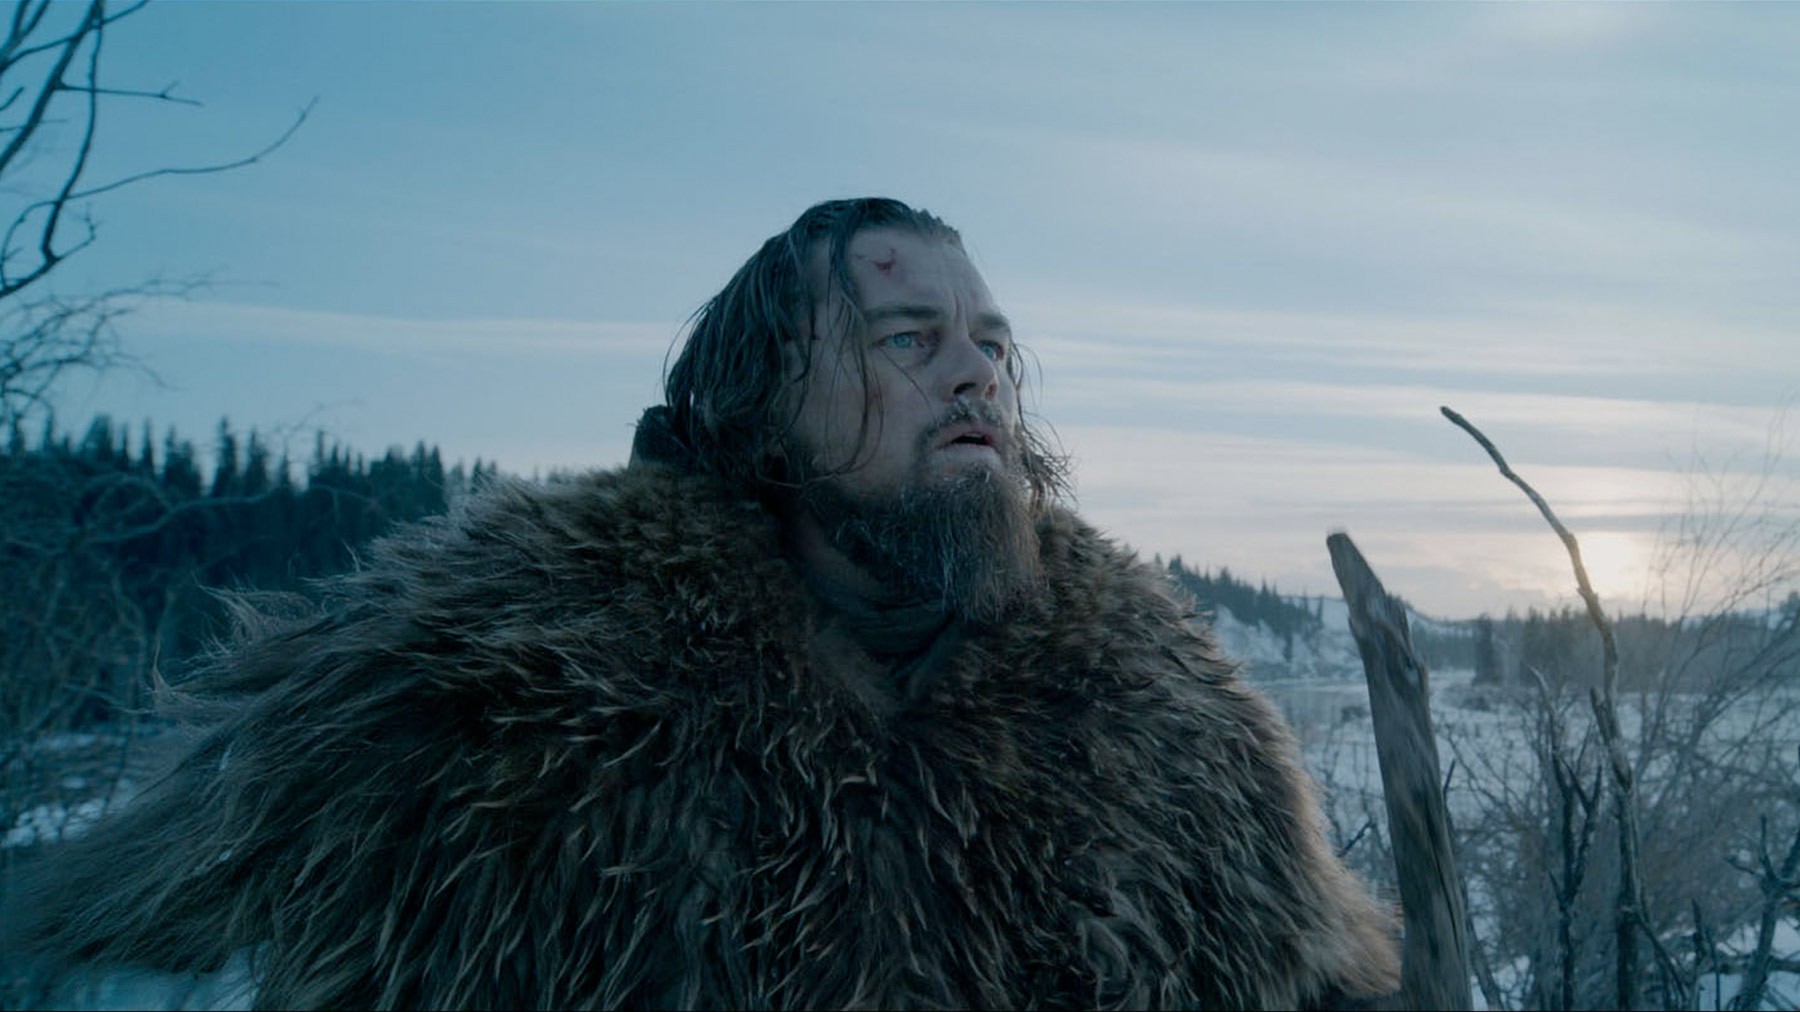 THE REVENANT Is Cold, Brutal and Unforgettable